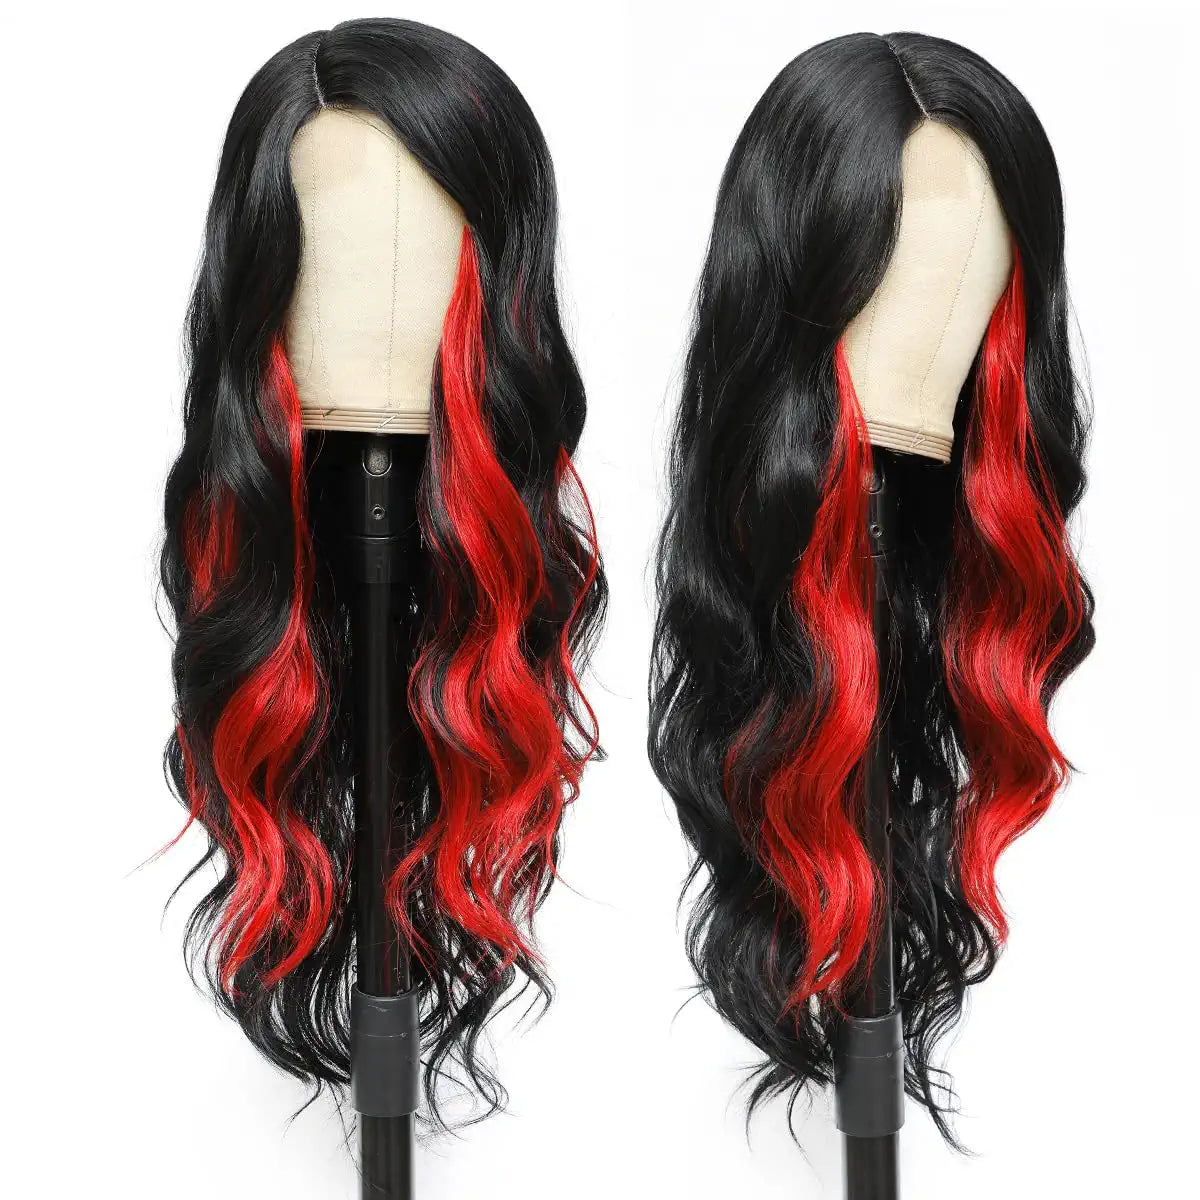 Black and Red Wig -Black Wig With Red Highlight Full Lace Wig